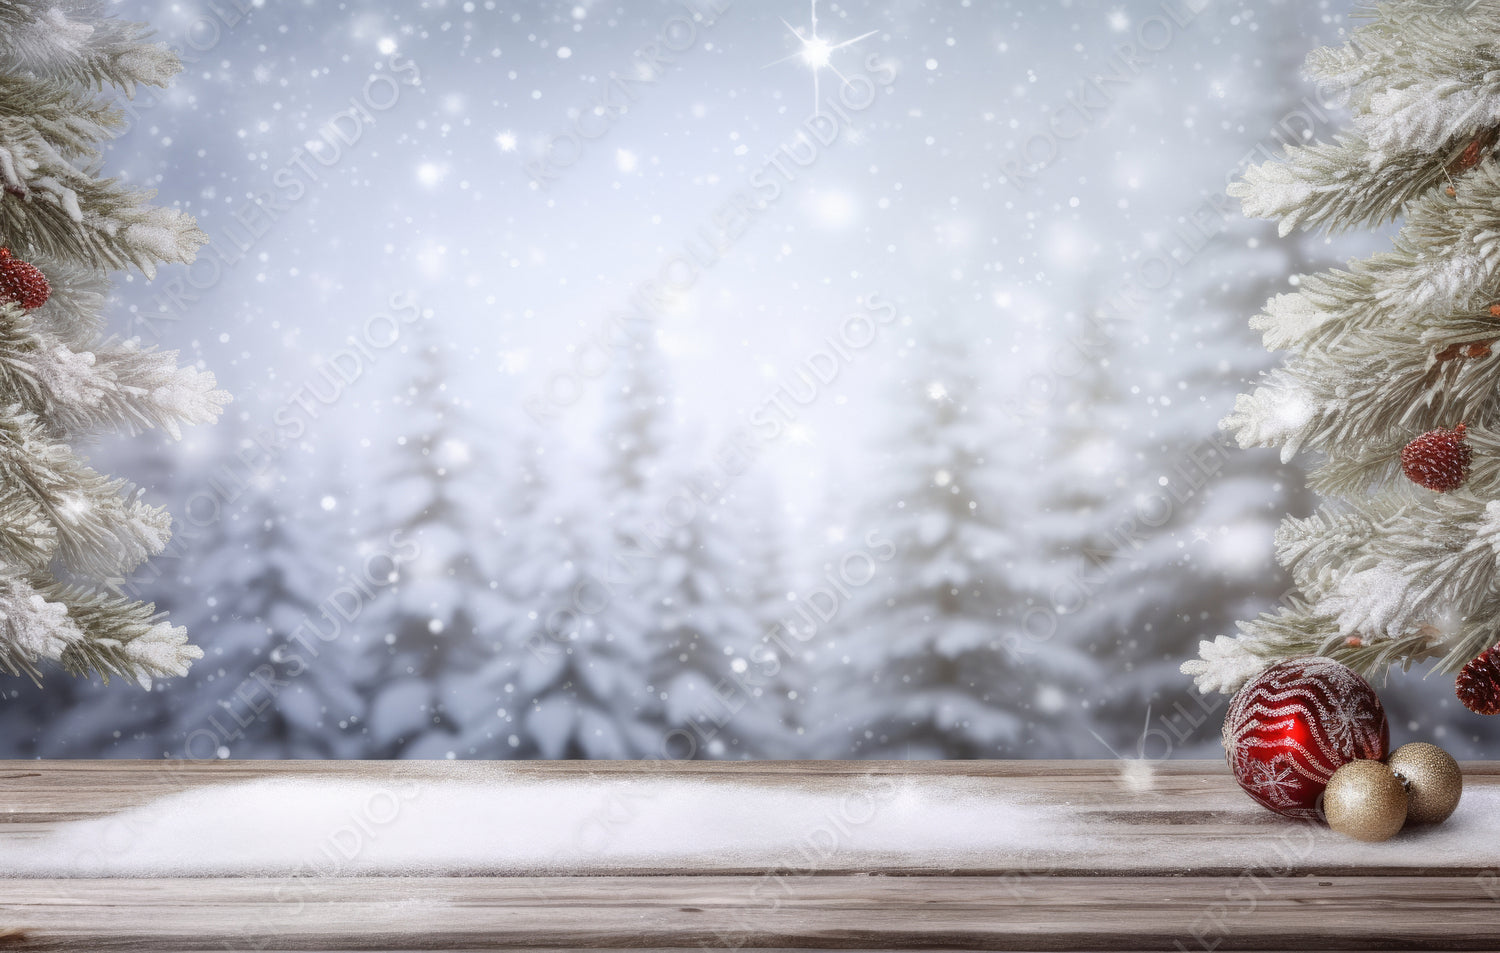 Winter christmas scenic  landscape background with copy space. Wooden flooring covered with snow in forest and Christmas tree on nature.